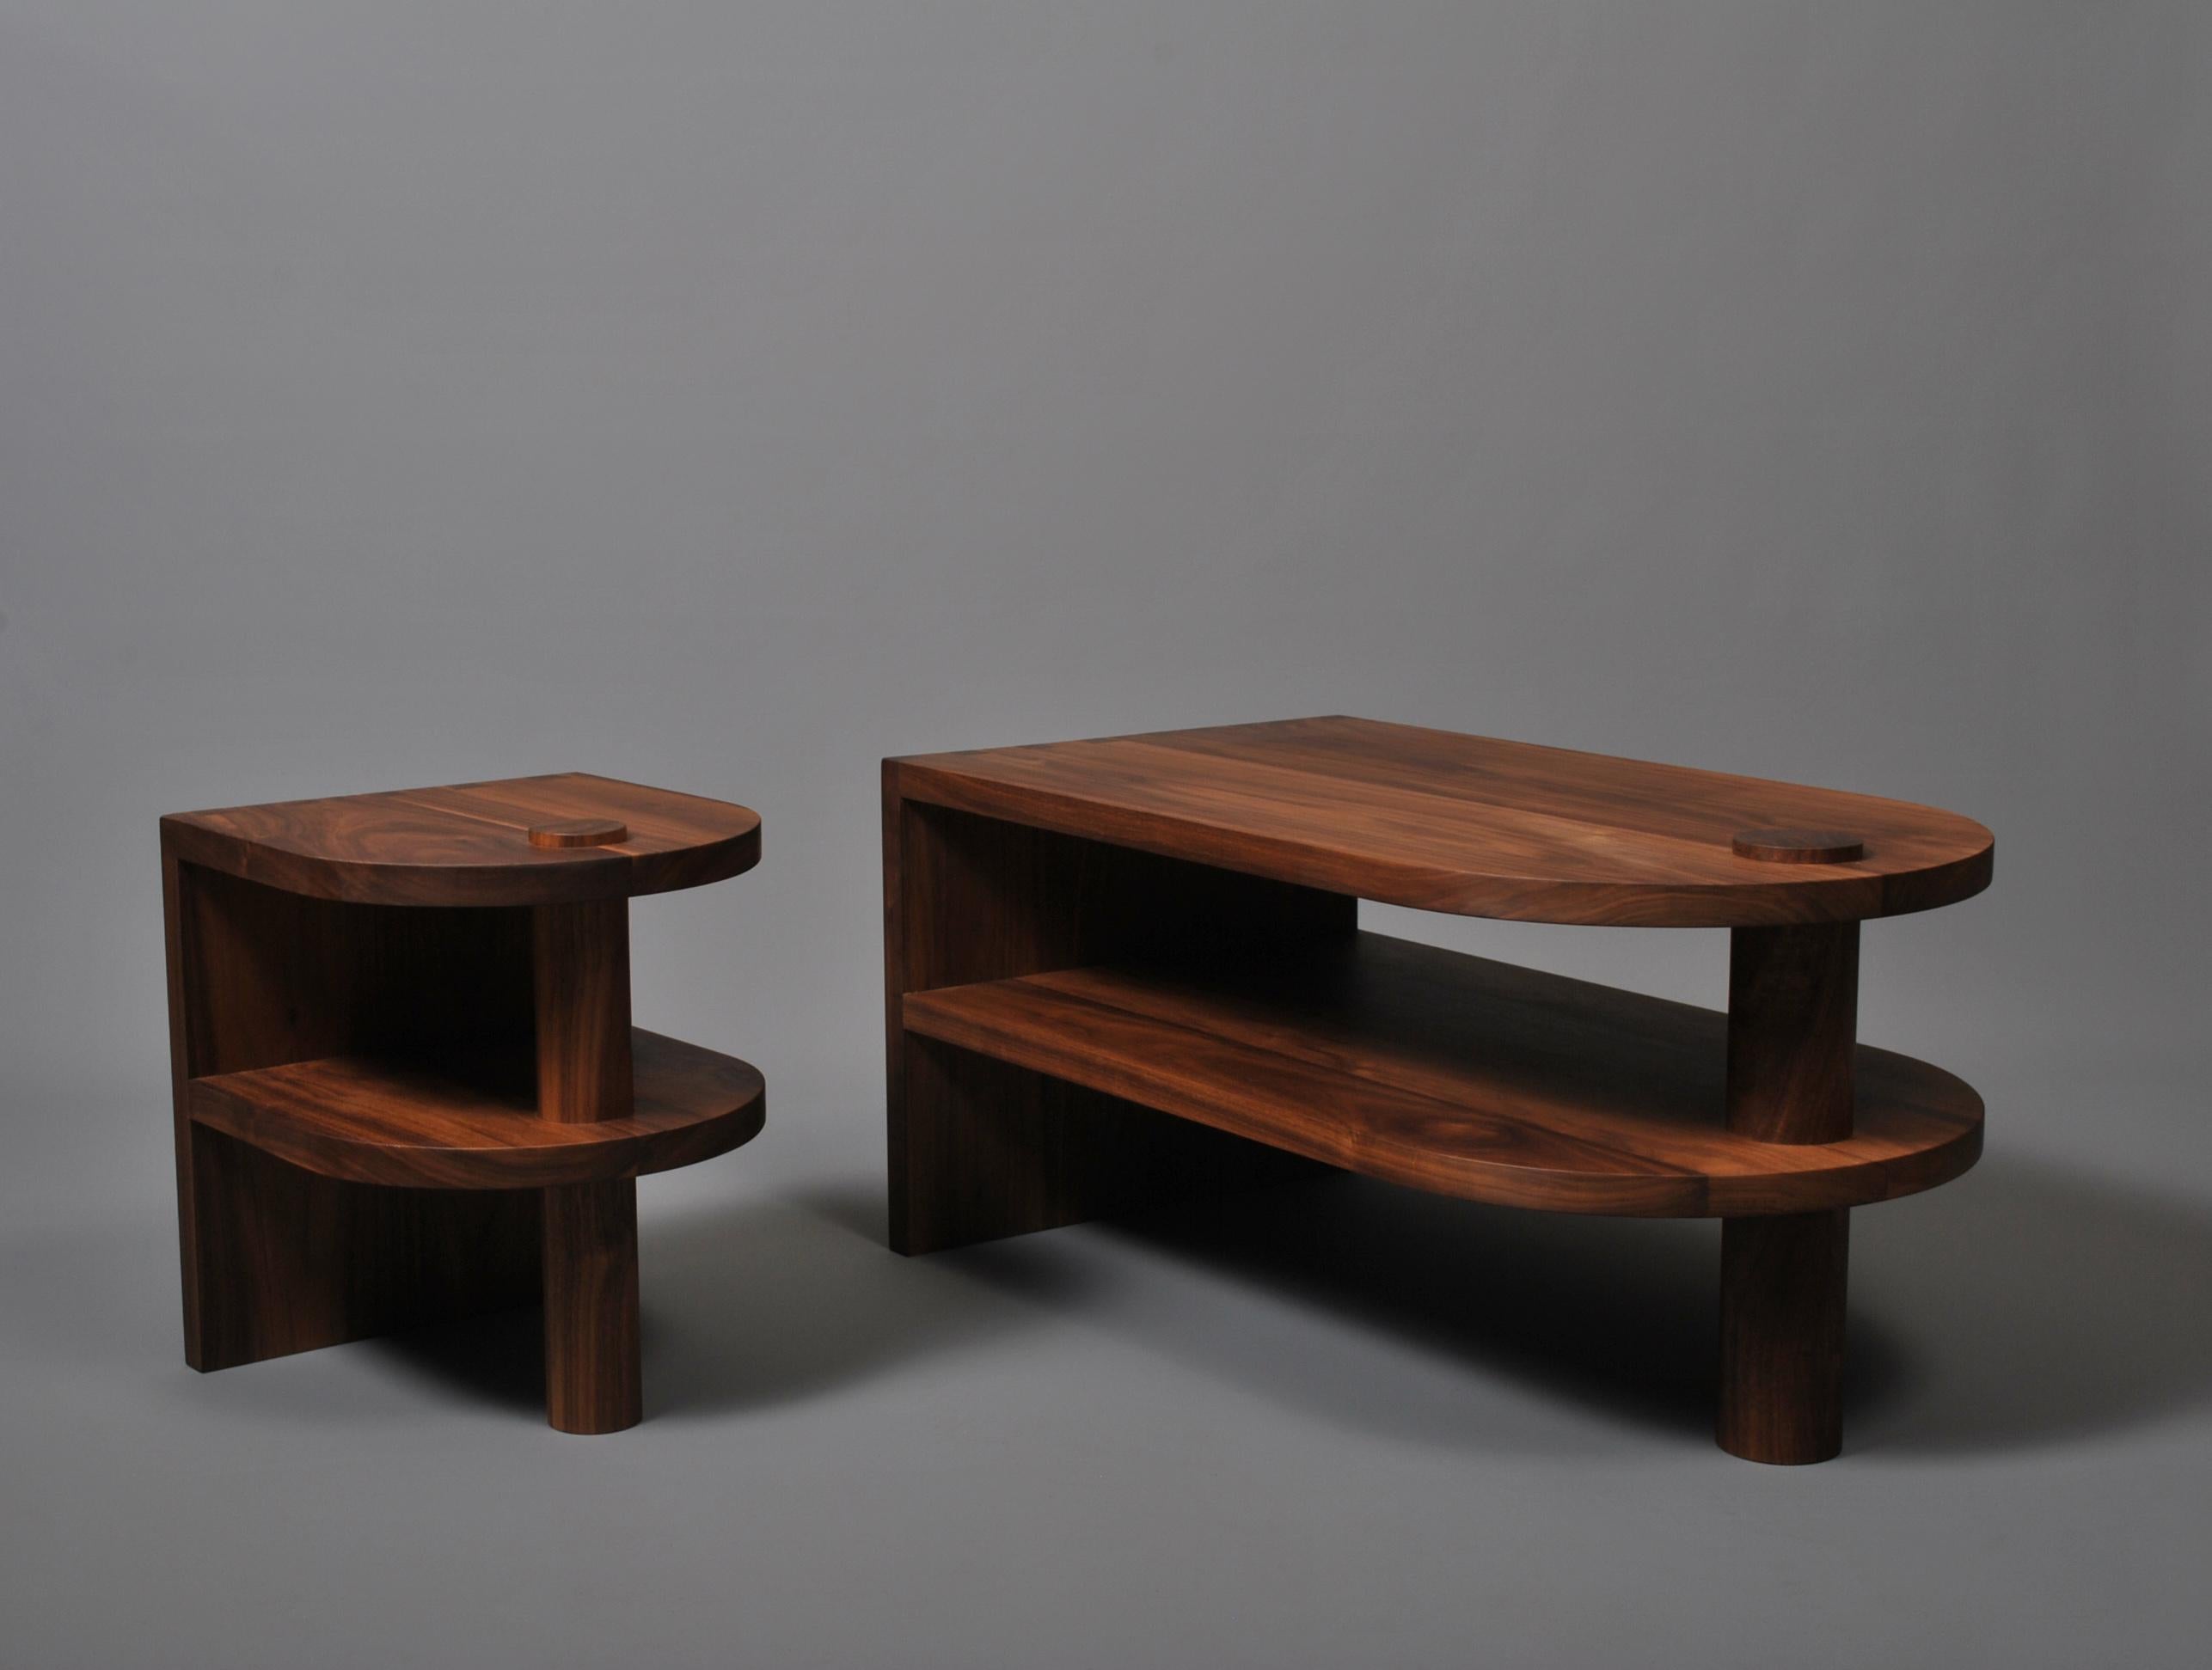 English Handcrafted Architectural Walnut Coffee Table For Sale